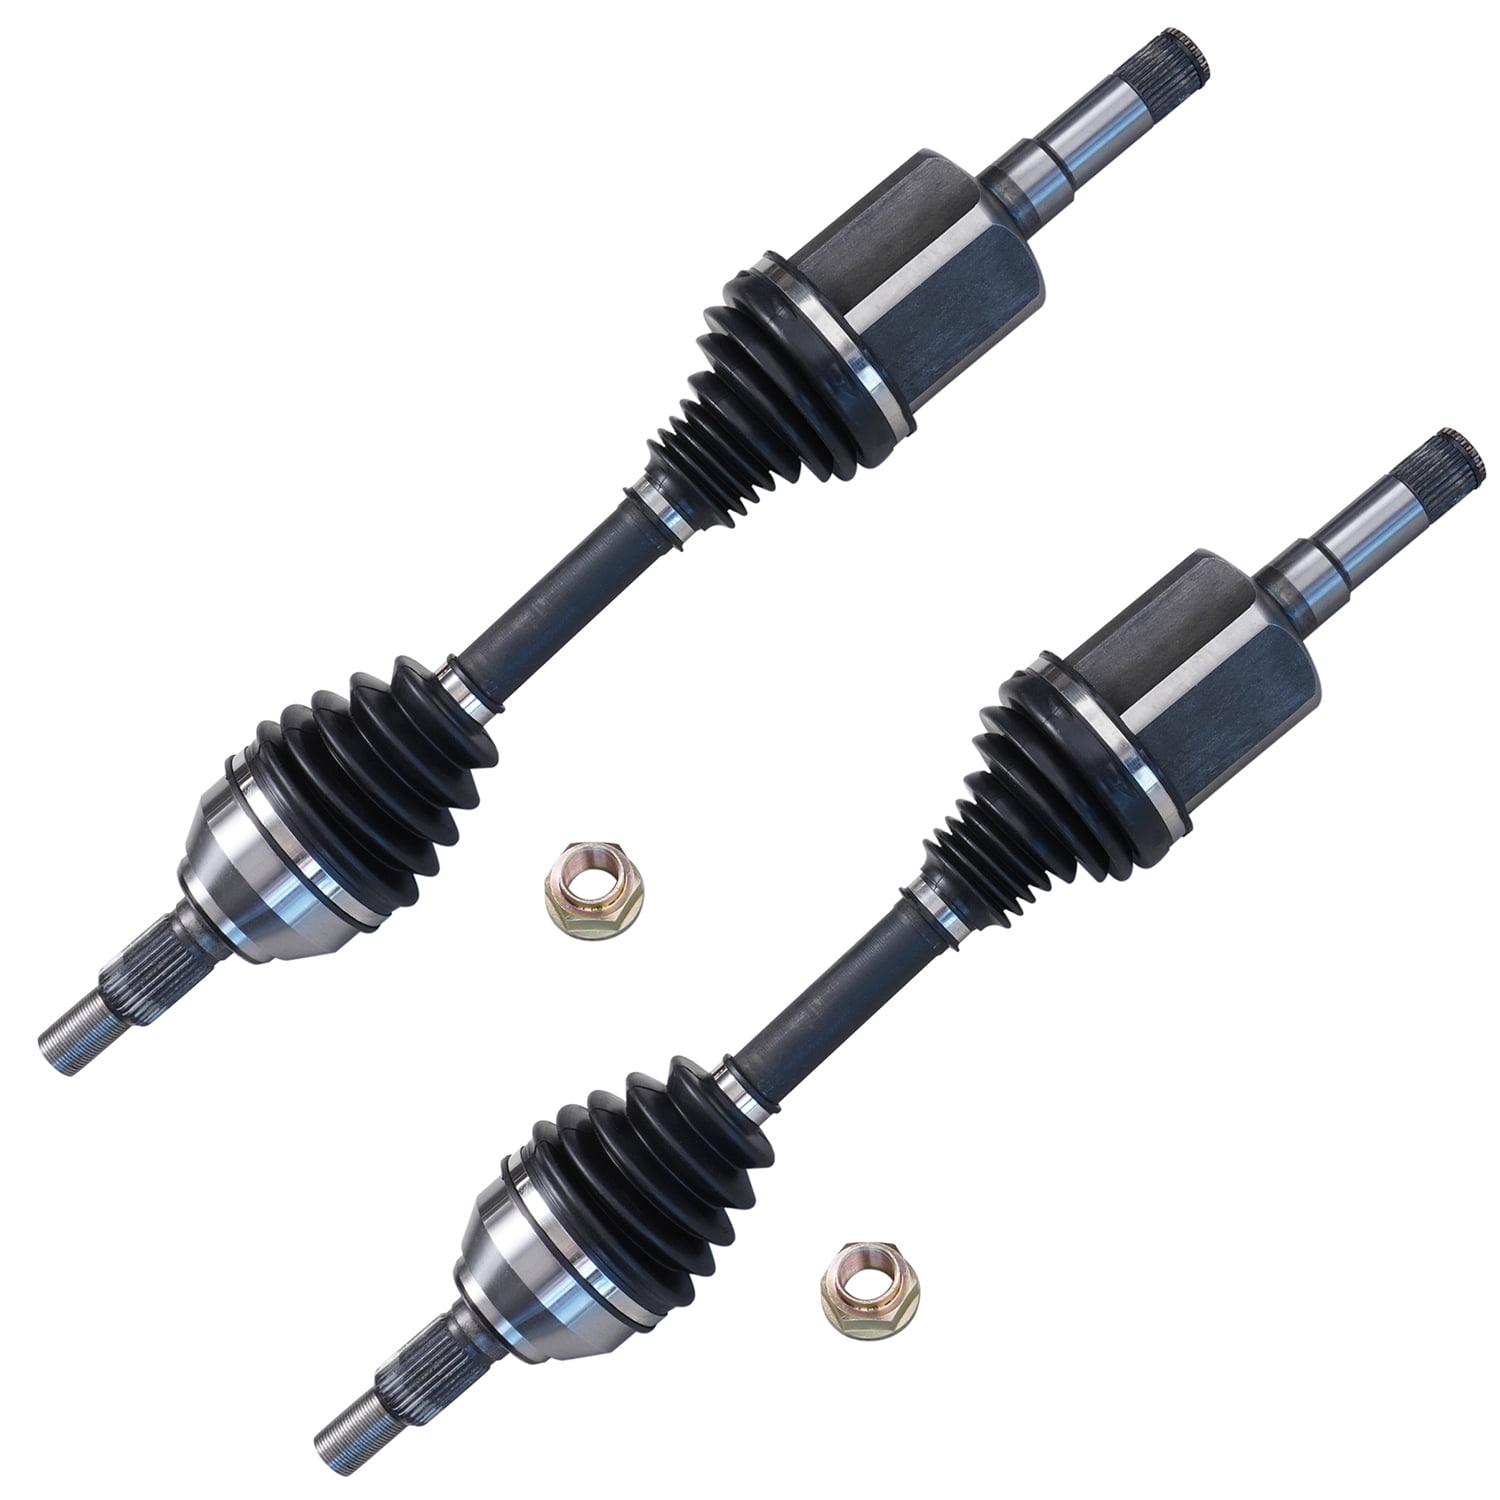 AutoShack ADSKPKG001 Set of 4 Front and Rear ATV CV Axle Drive Shaft Assembly Replacement for 2003 2004 2005 2006 2007 2008 Yamaha YFM660F Grizzly 4x4 